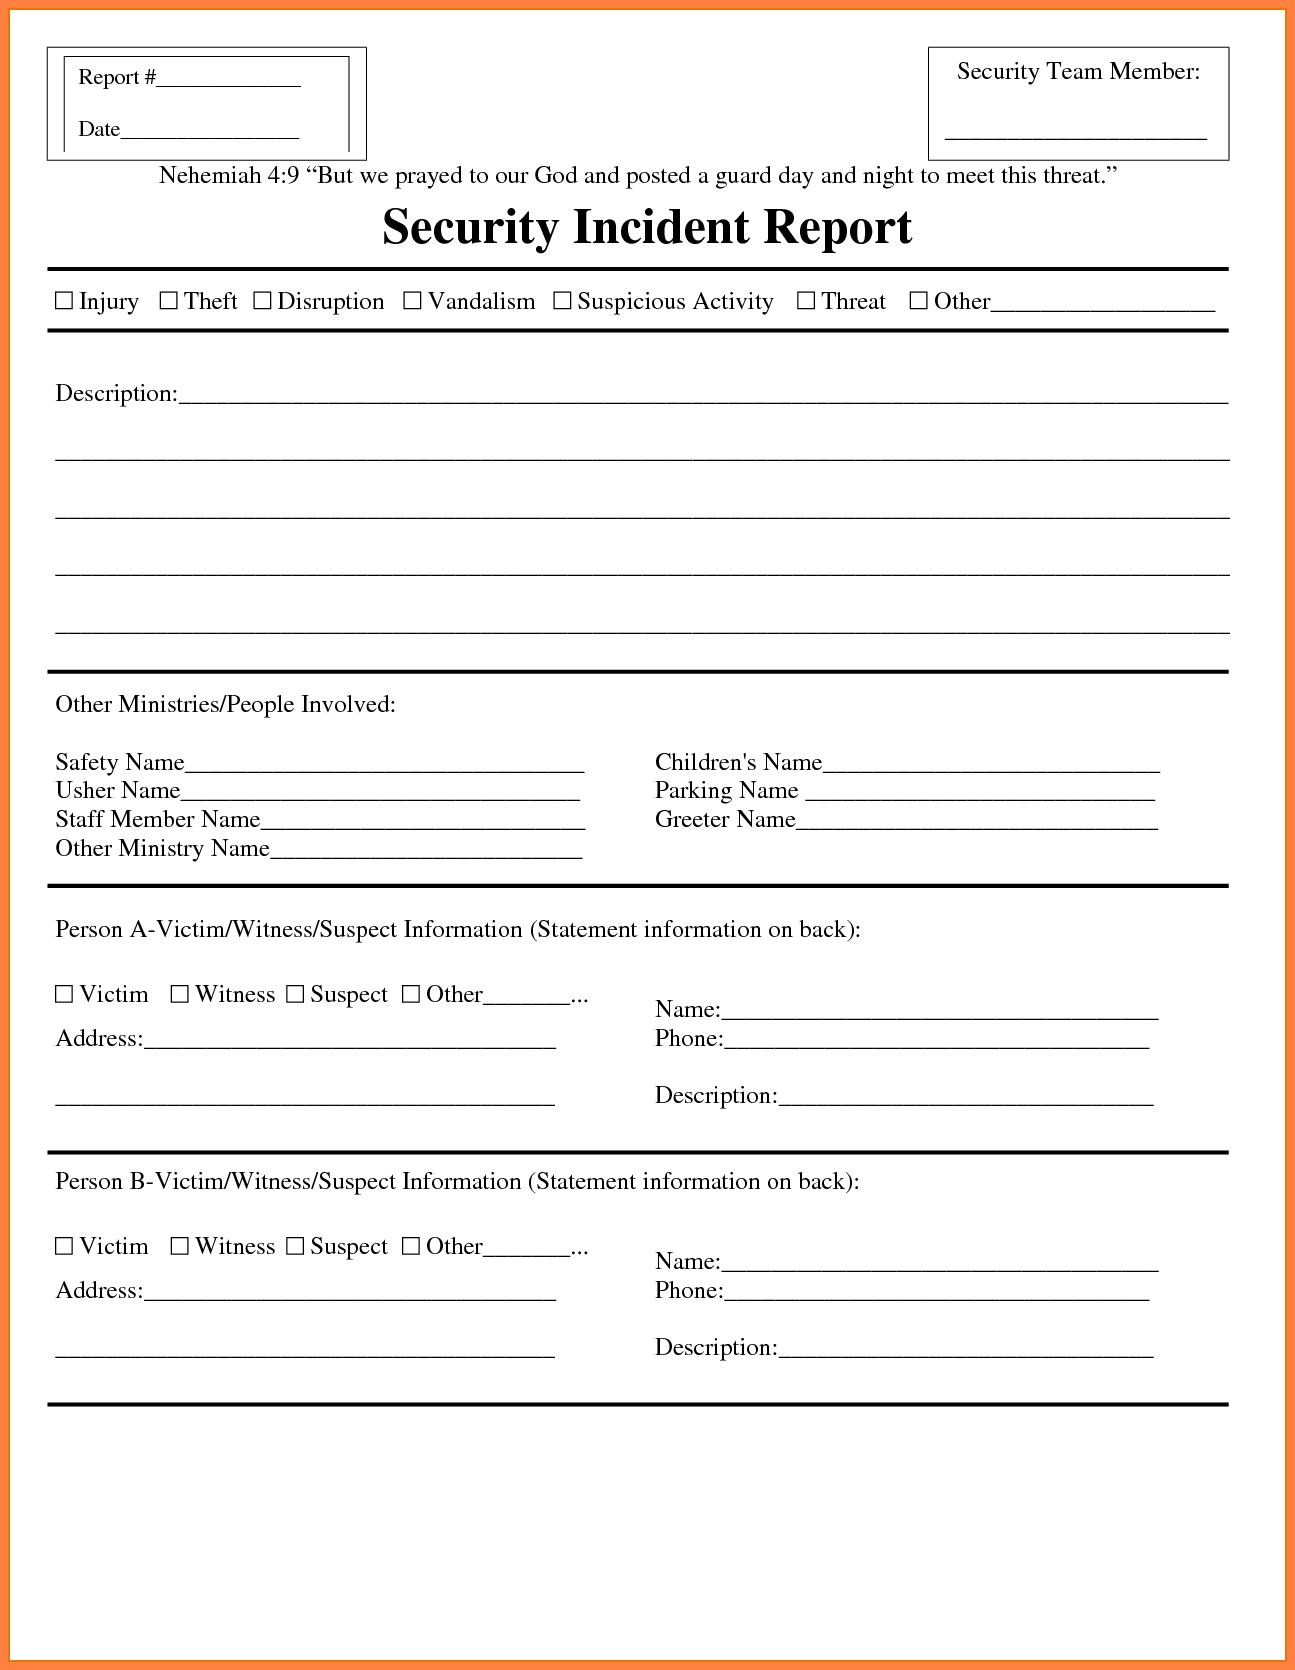 Soc 1 Type 2 Report Example | Tagua In Ssae 16 Report Template